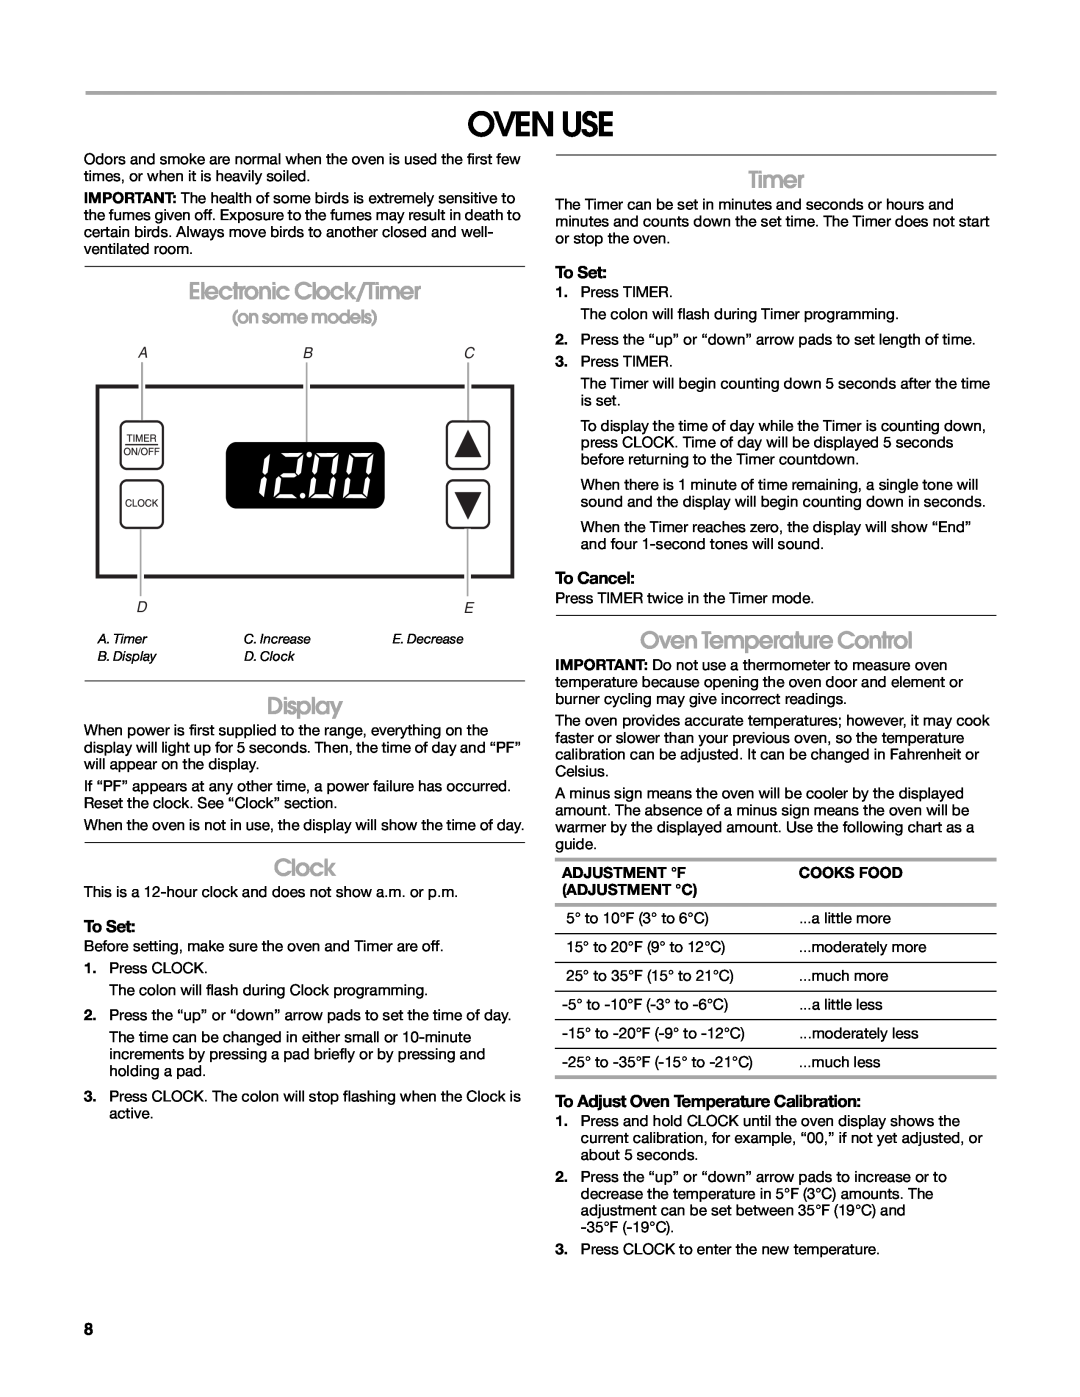 Whirlpool W10162215A manual Oven Use, Electronic Clock/Timer, Display, Oven Temperature Control, To Set, To Cancel 